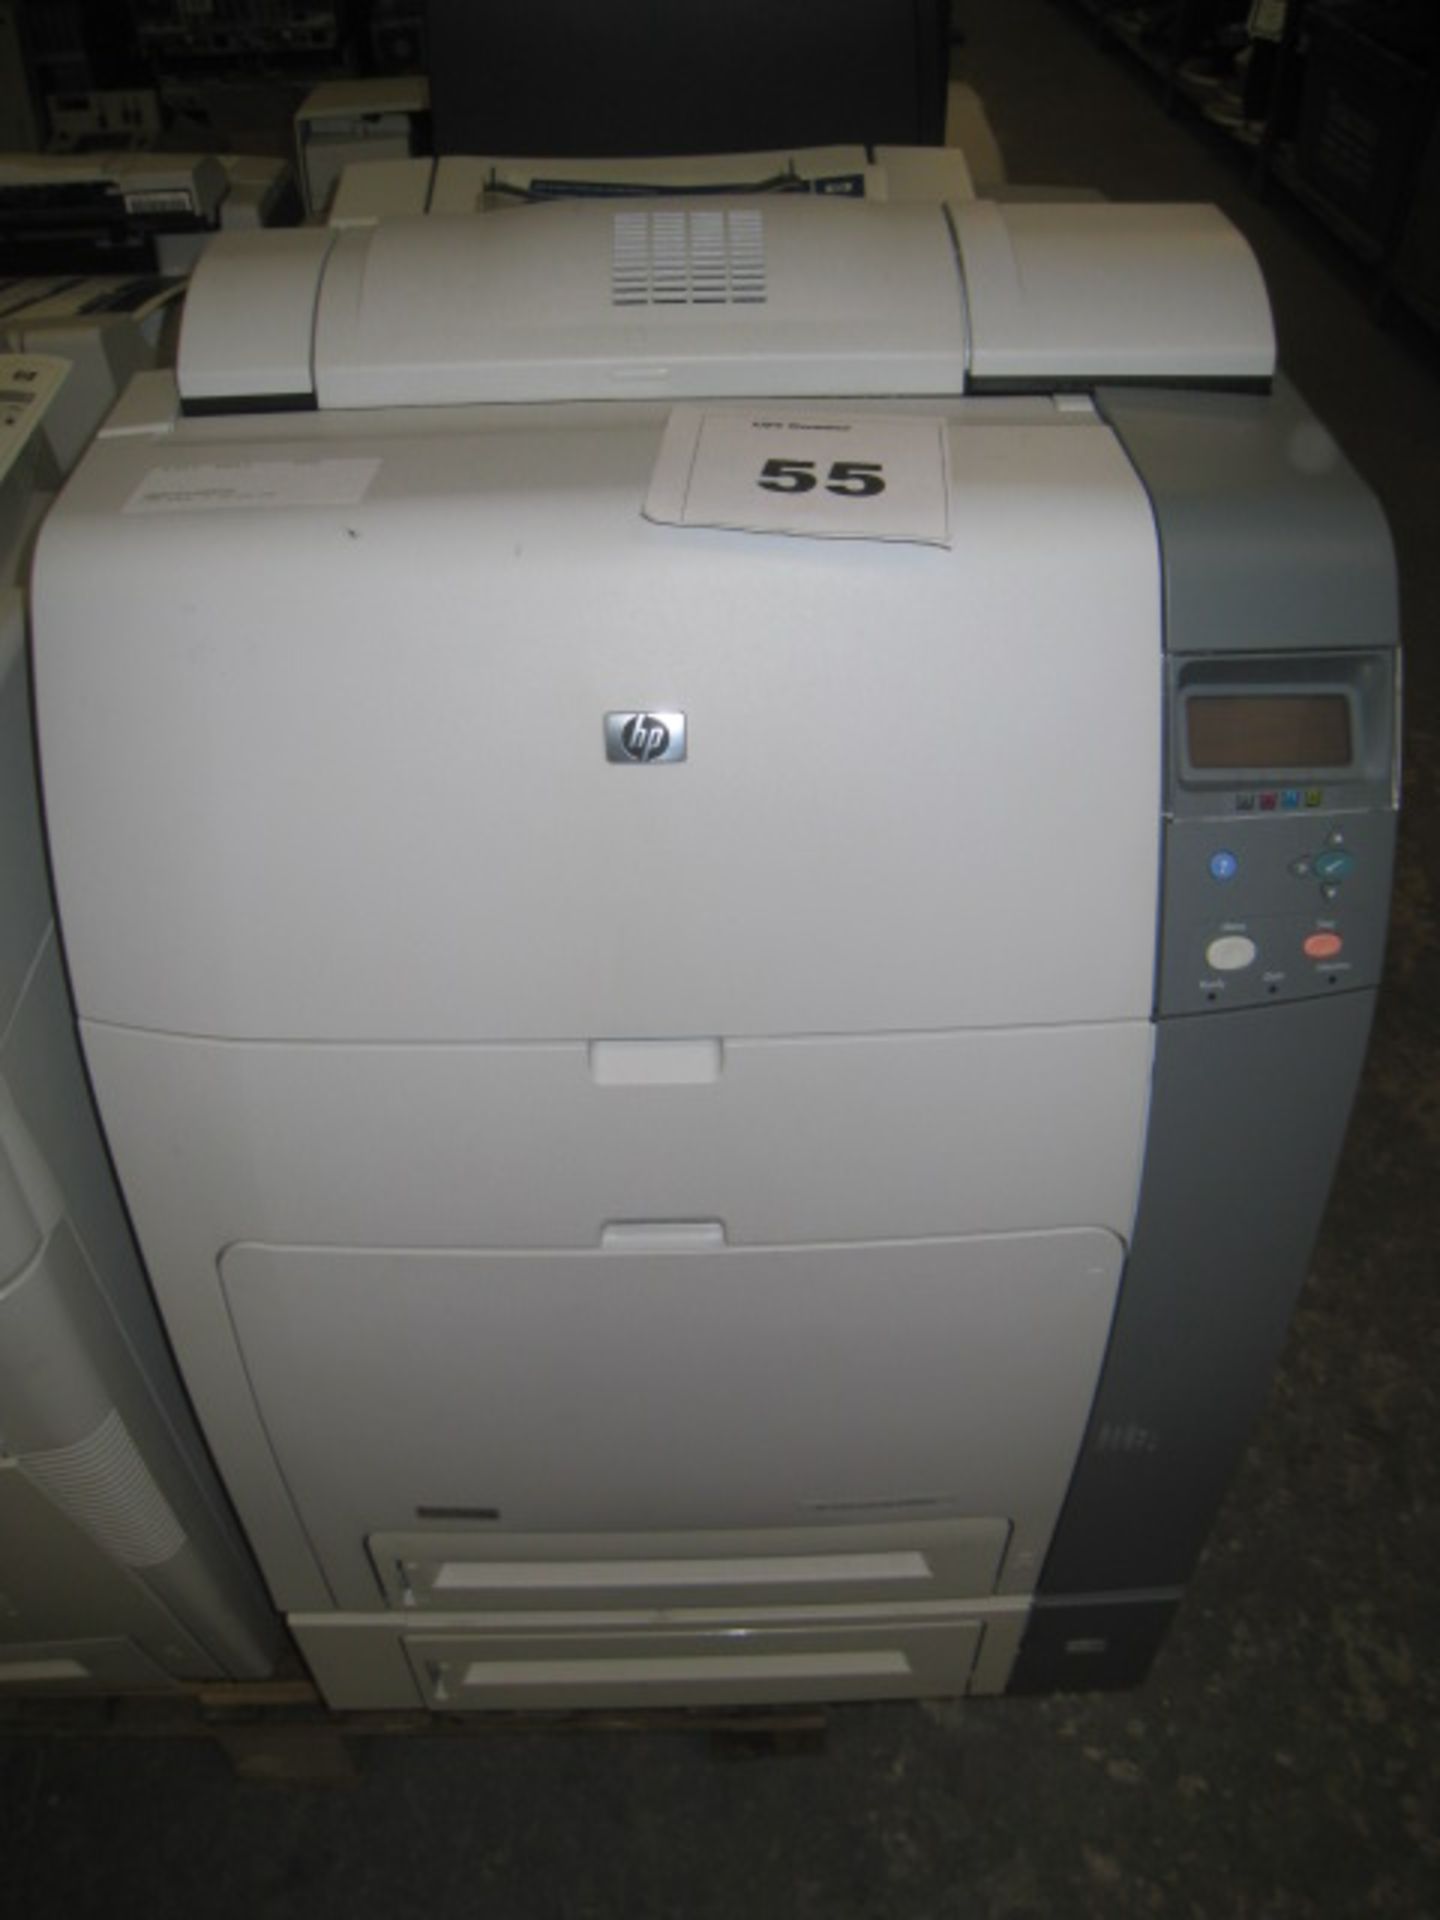 HP Colour Laserjet 4700dtn with test print